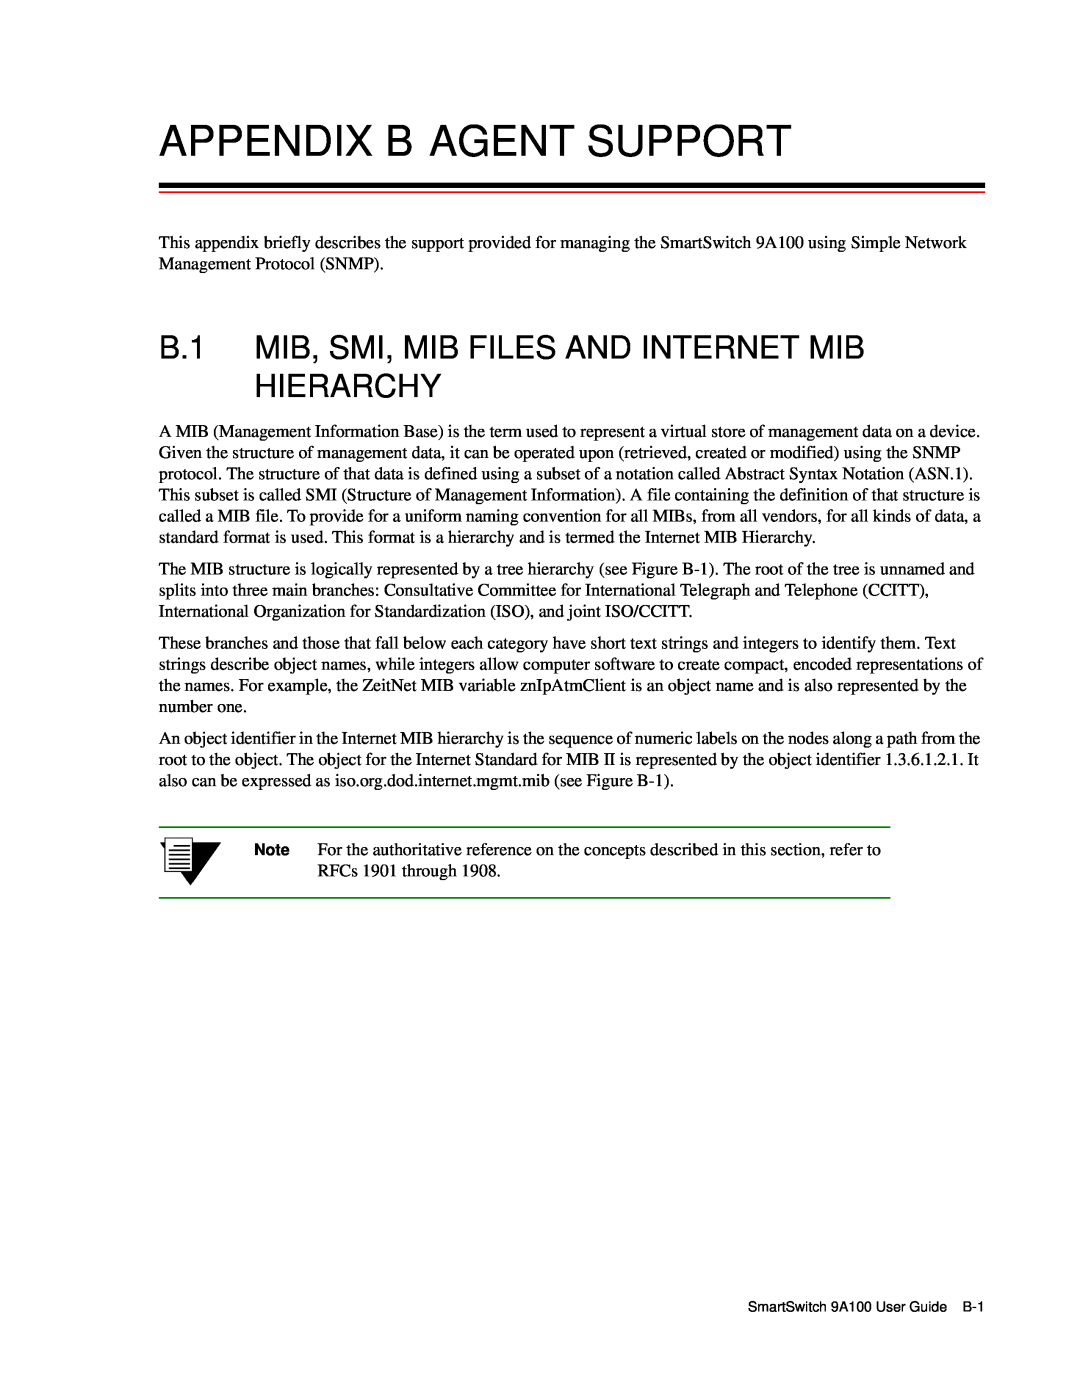 Cabletron Systems 9A100 manual Appendix B Agent Support, B.1 MIB, SMI, MIB FILES AND INTERNET MIB HIERARCHY 